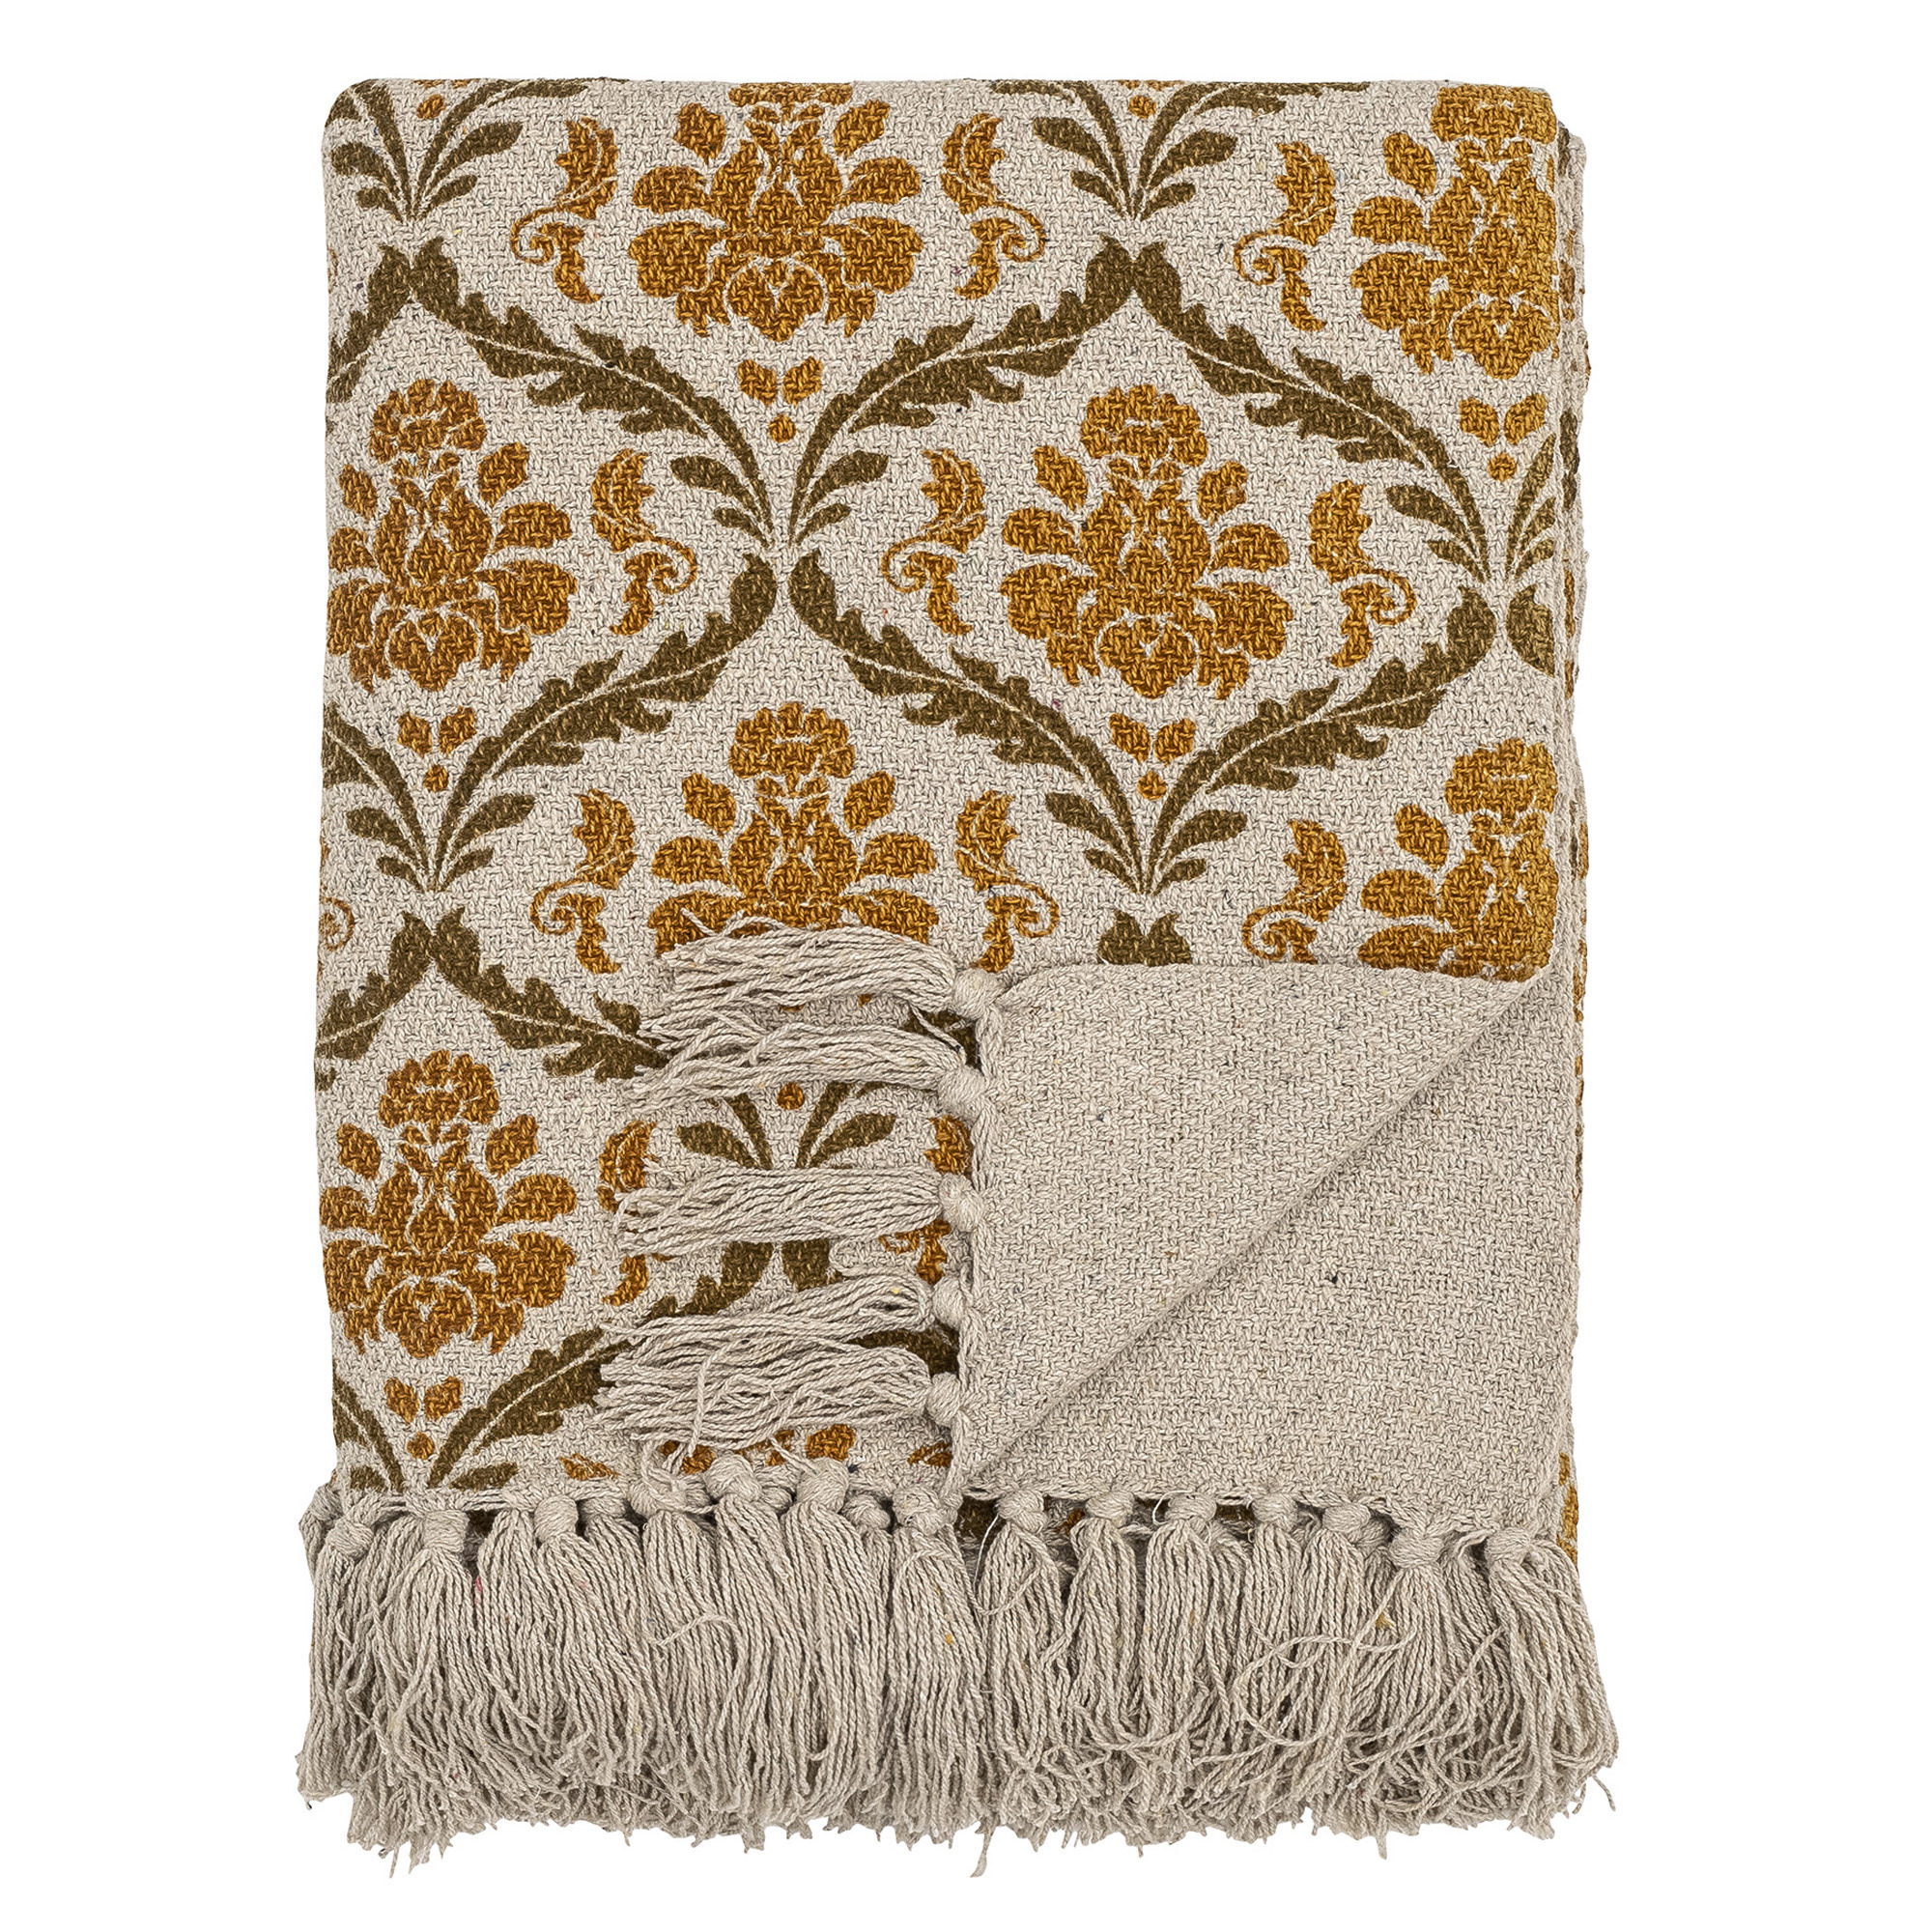 Ochre Patterned Throw Blanket, Yellow - Barker & Stonehouse - image 1